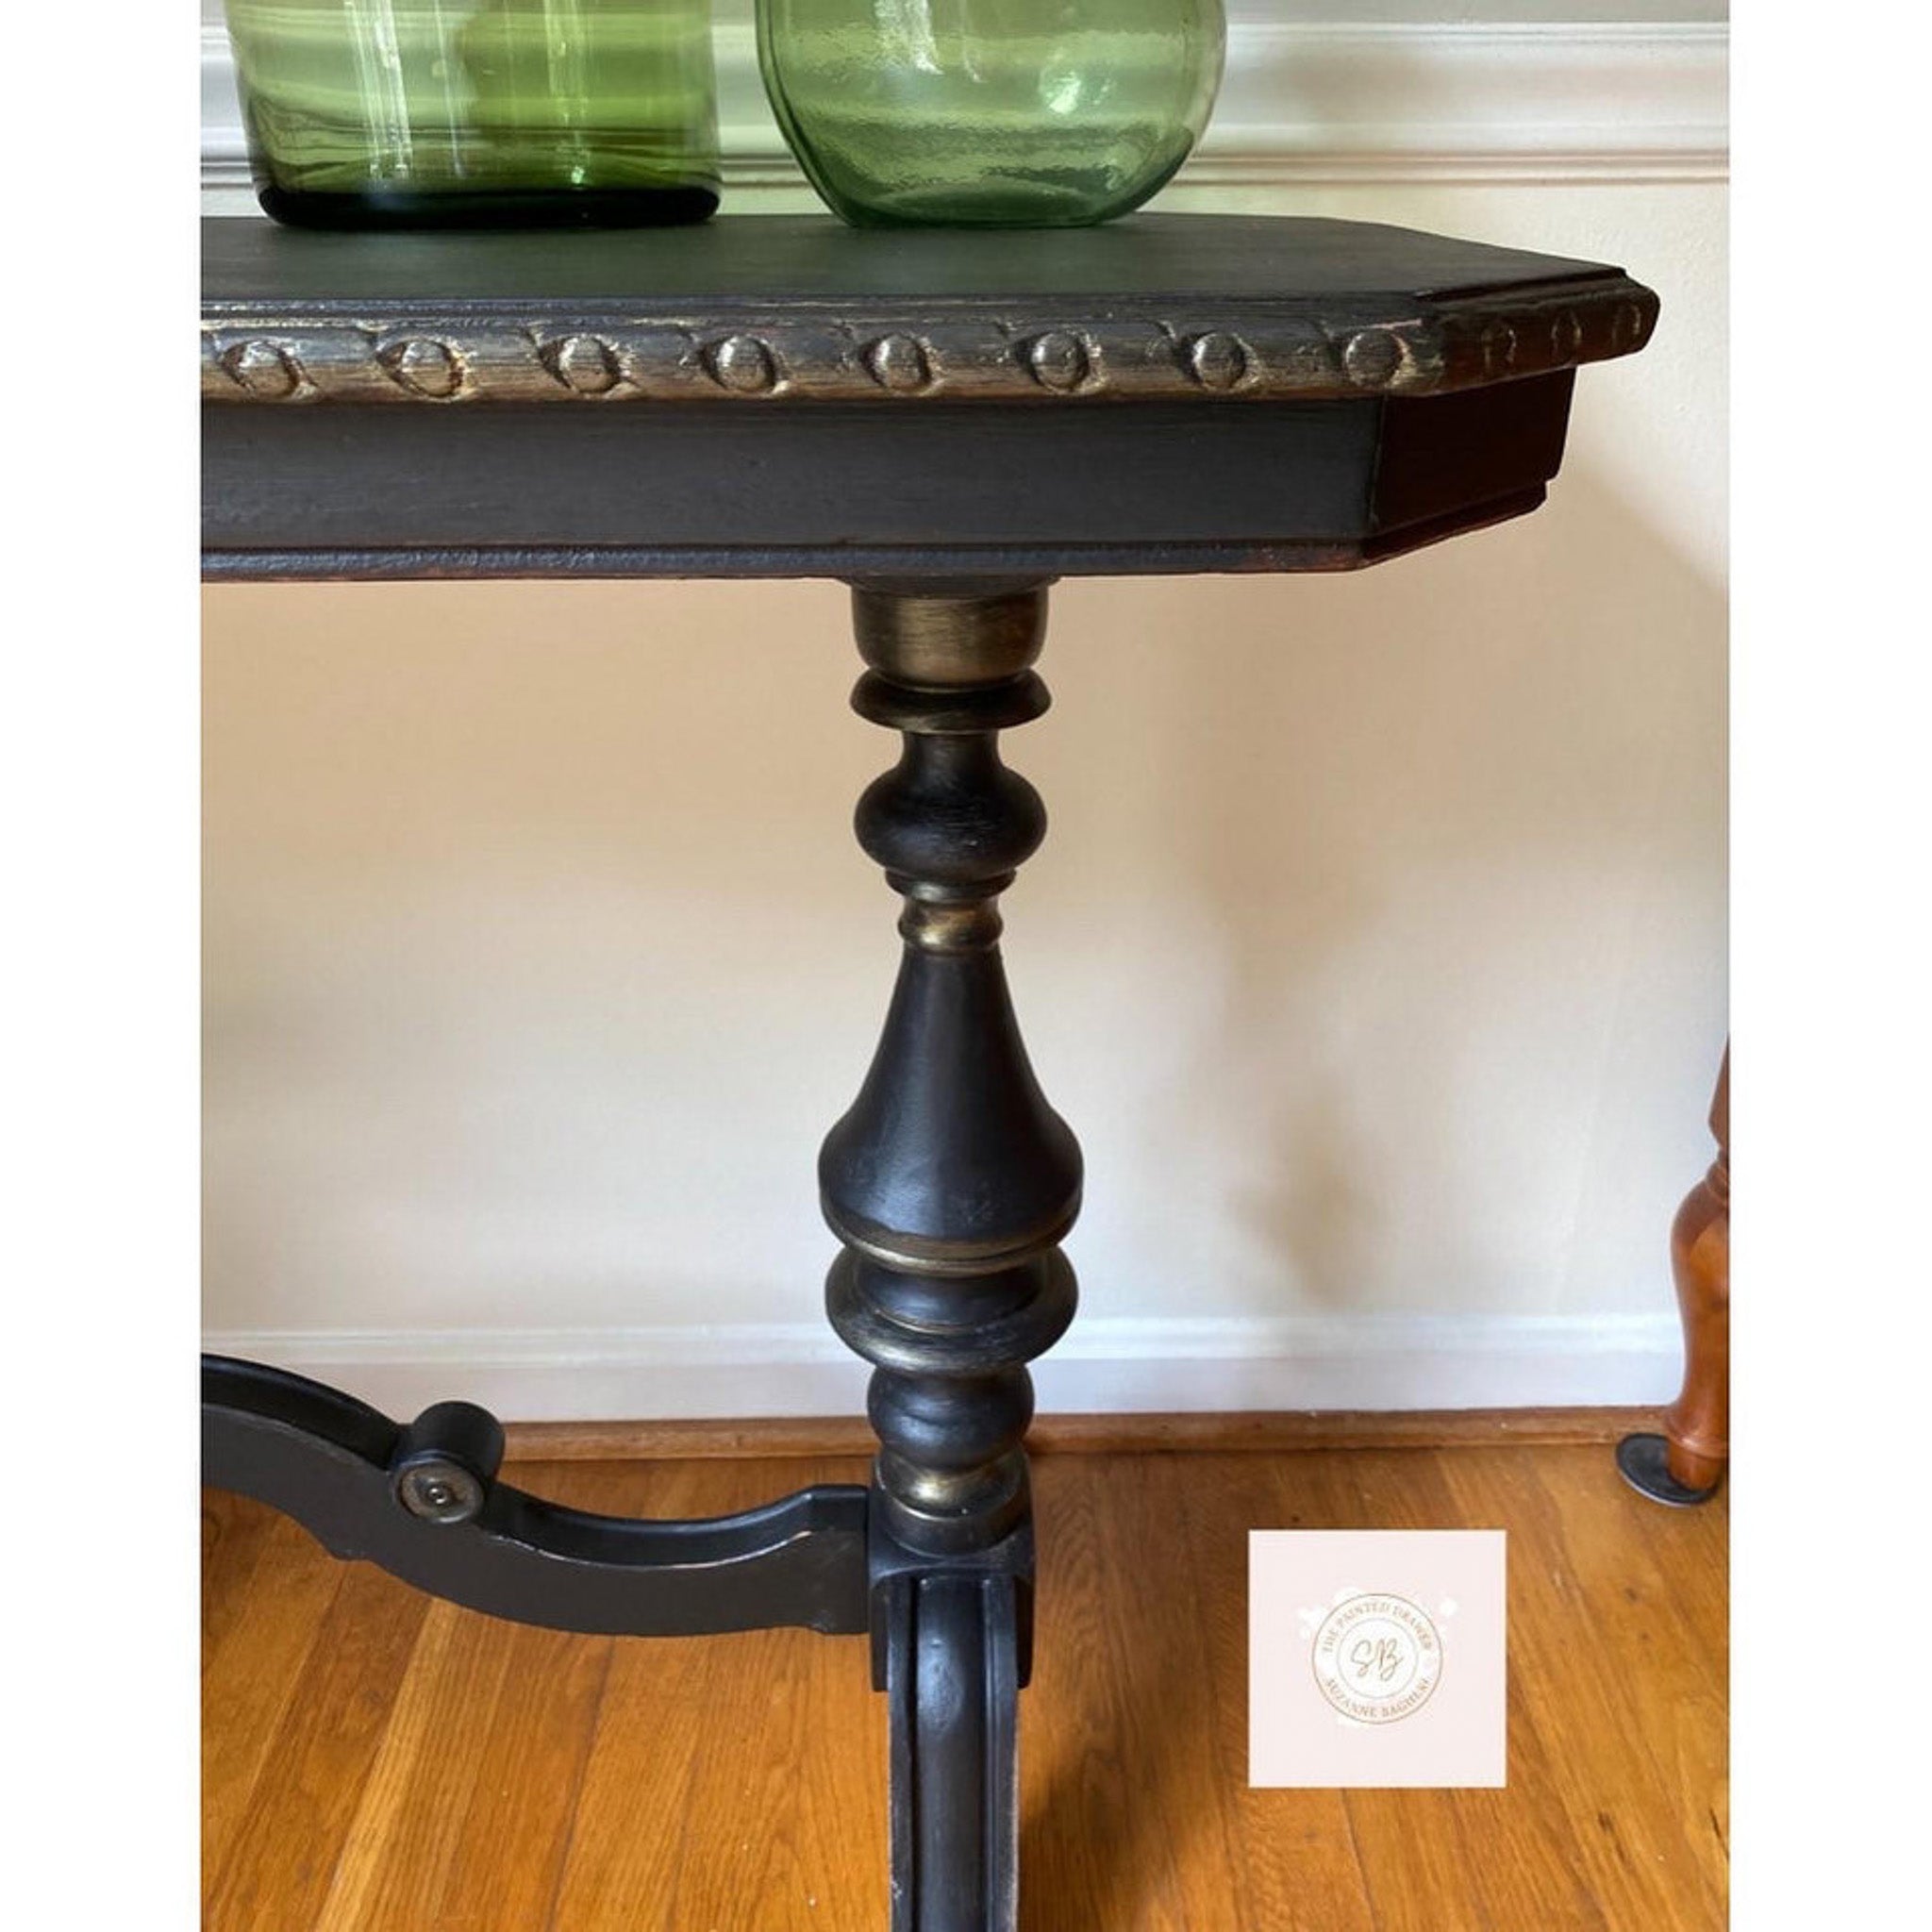 A vintage entryway table refurbished by The Painted Drawer is painted black and features Dixie Belle Paint's Gold Shimmer Glaze to accent edges and details.